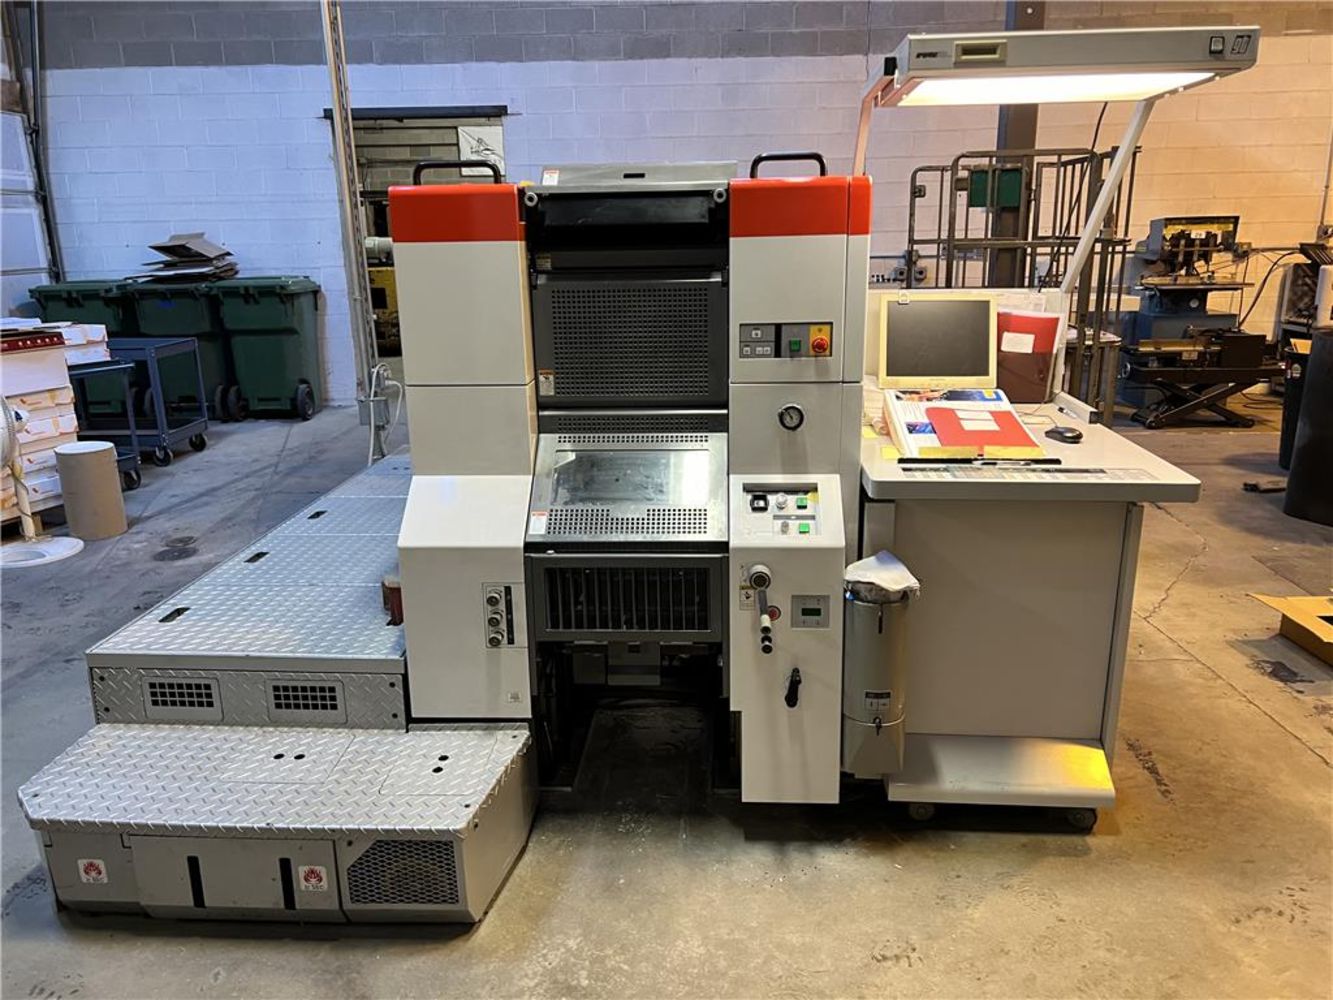 23-37 PUBLIC TIMED ONLINE AUCTION: (2) RYOBI DI OFFSET PRINTING PRESSES - POSTAGE & MAILING MACHINES - YALE FORKLIFT - SHOP & PRINT SUPPORT EQ.